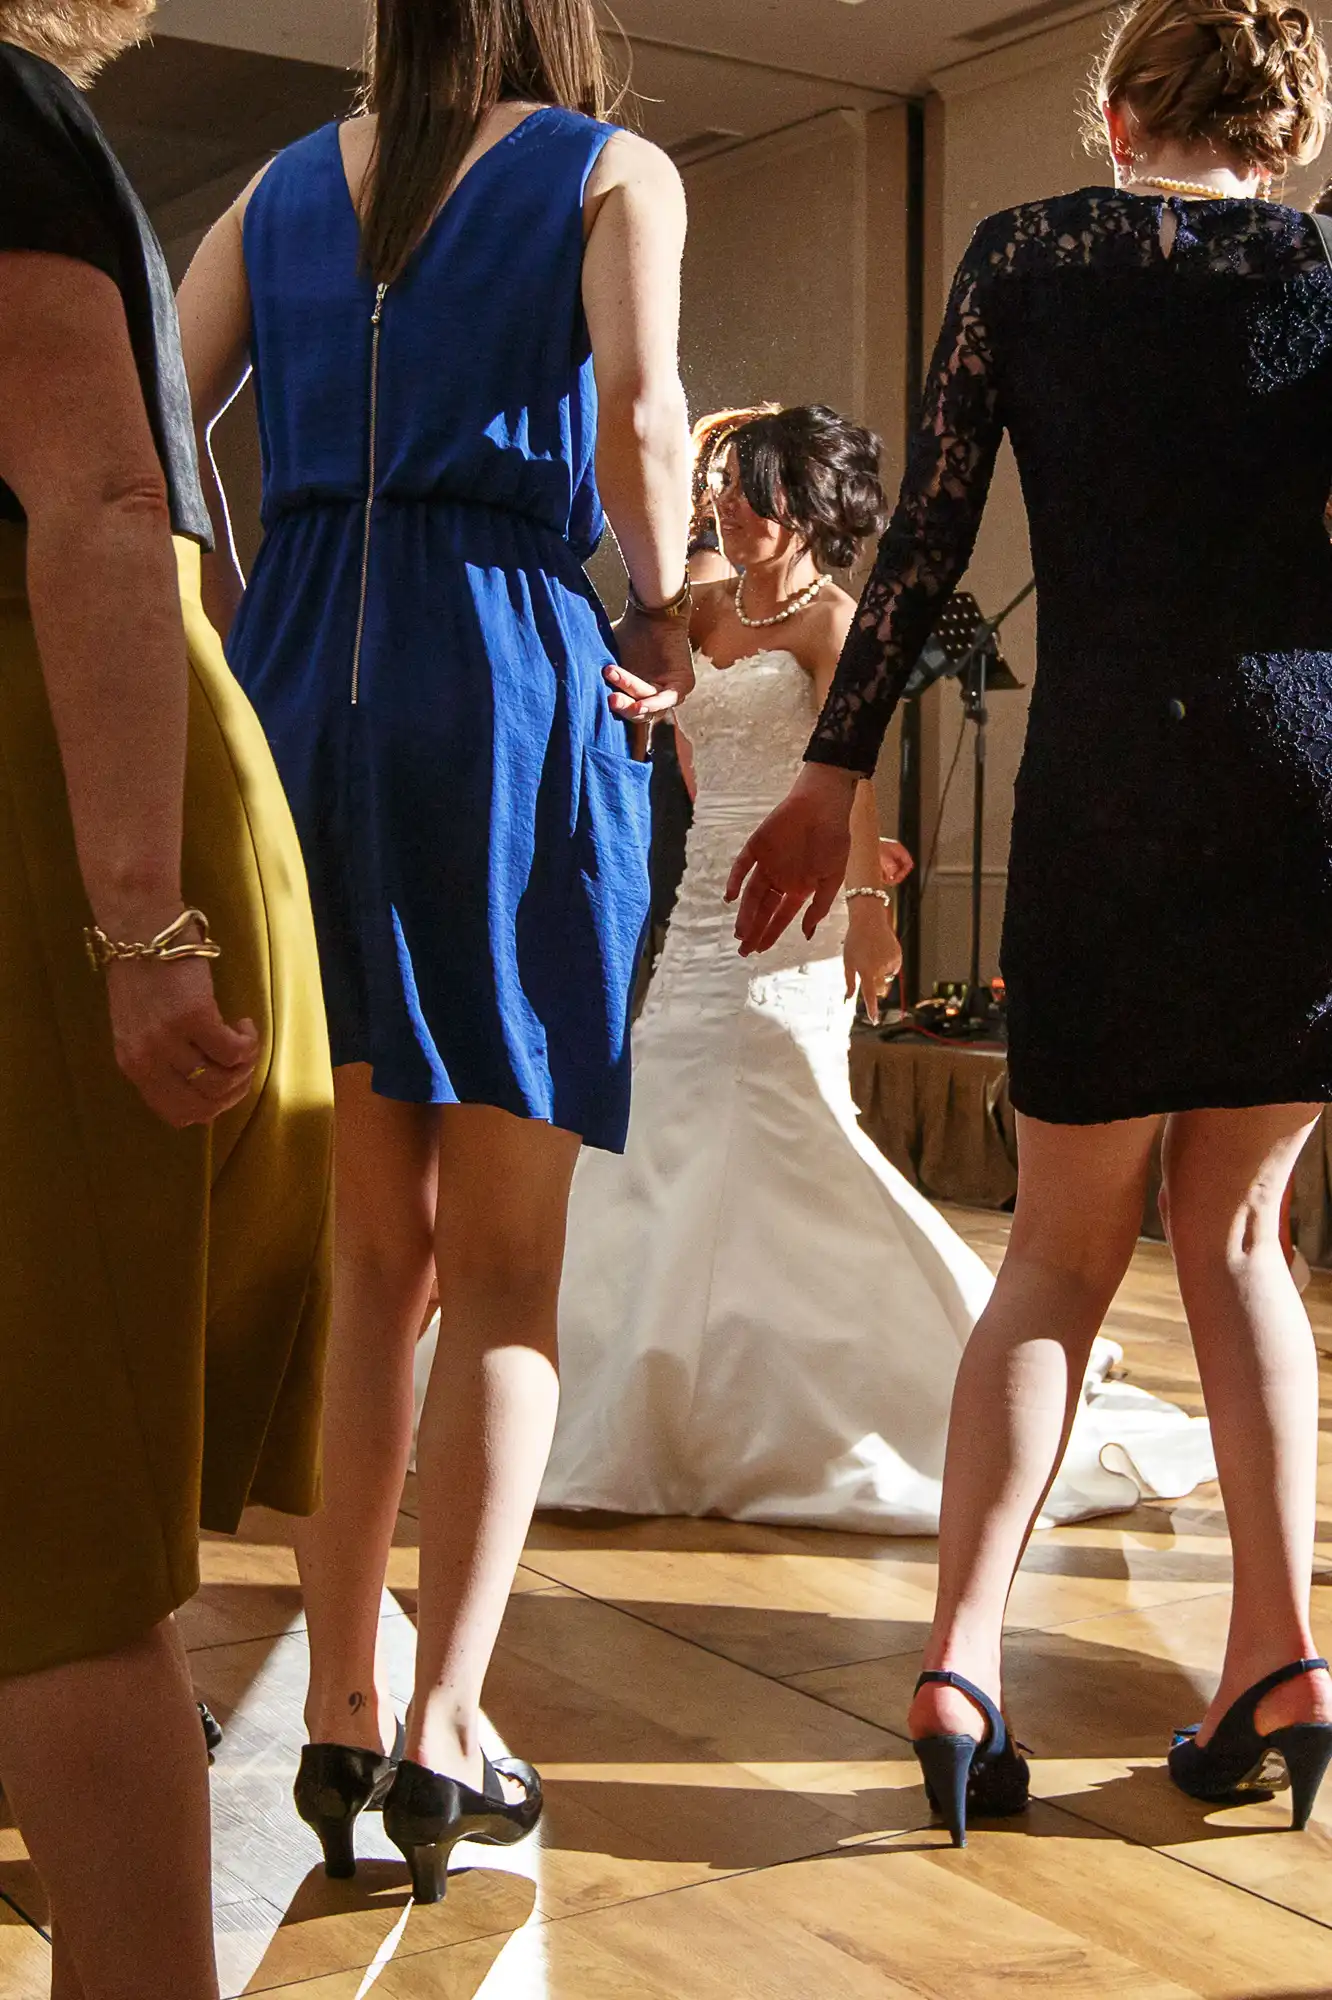 A bride dancing surrounded by guests in elegant attire at a wedding reception.